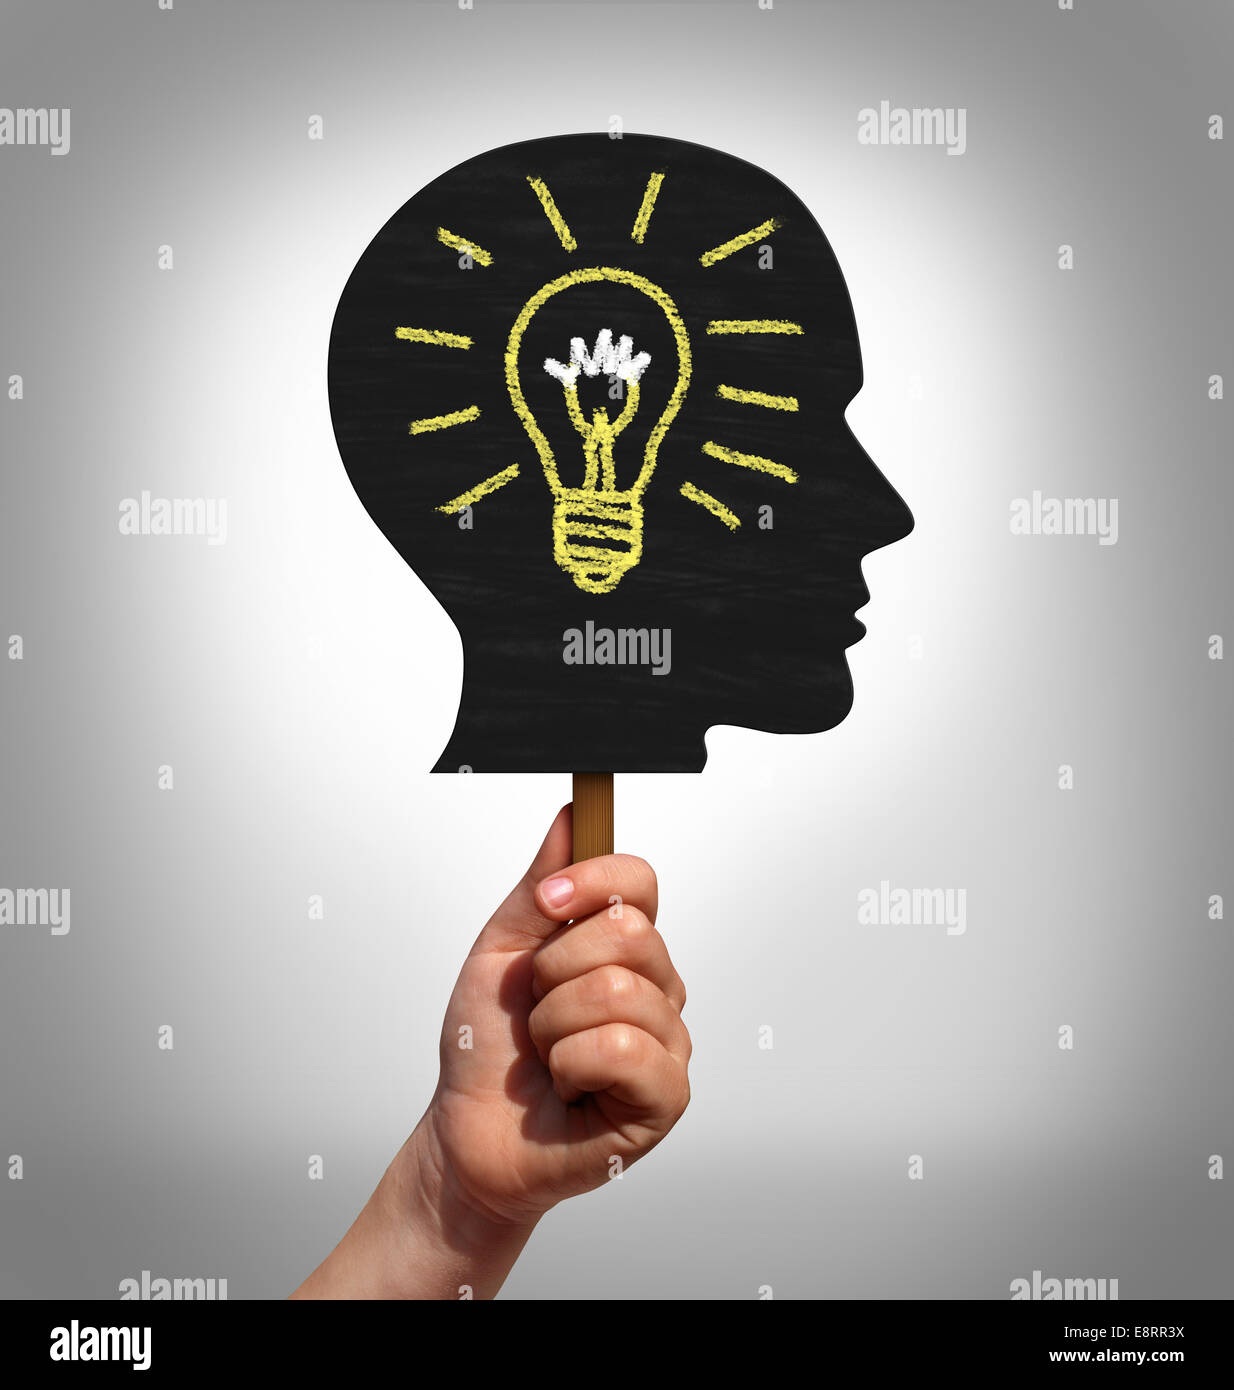 Education advocacy concept and the rights for children to get access to affordable school training and  learning as a hand holding up a placard sign shaped as a head with a drawing of a light bulb as a metaphor for social youth support. Stock Photo